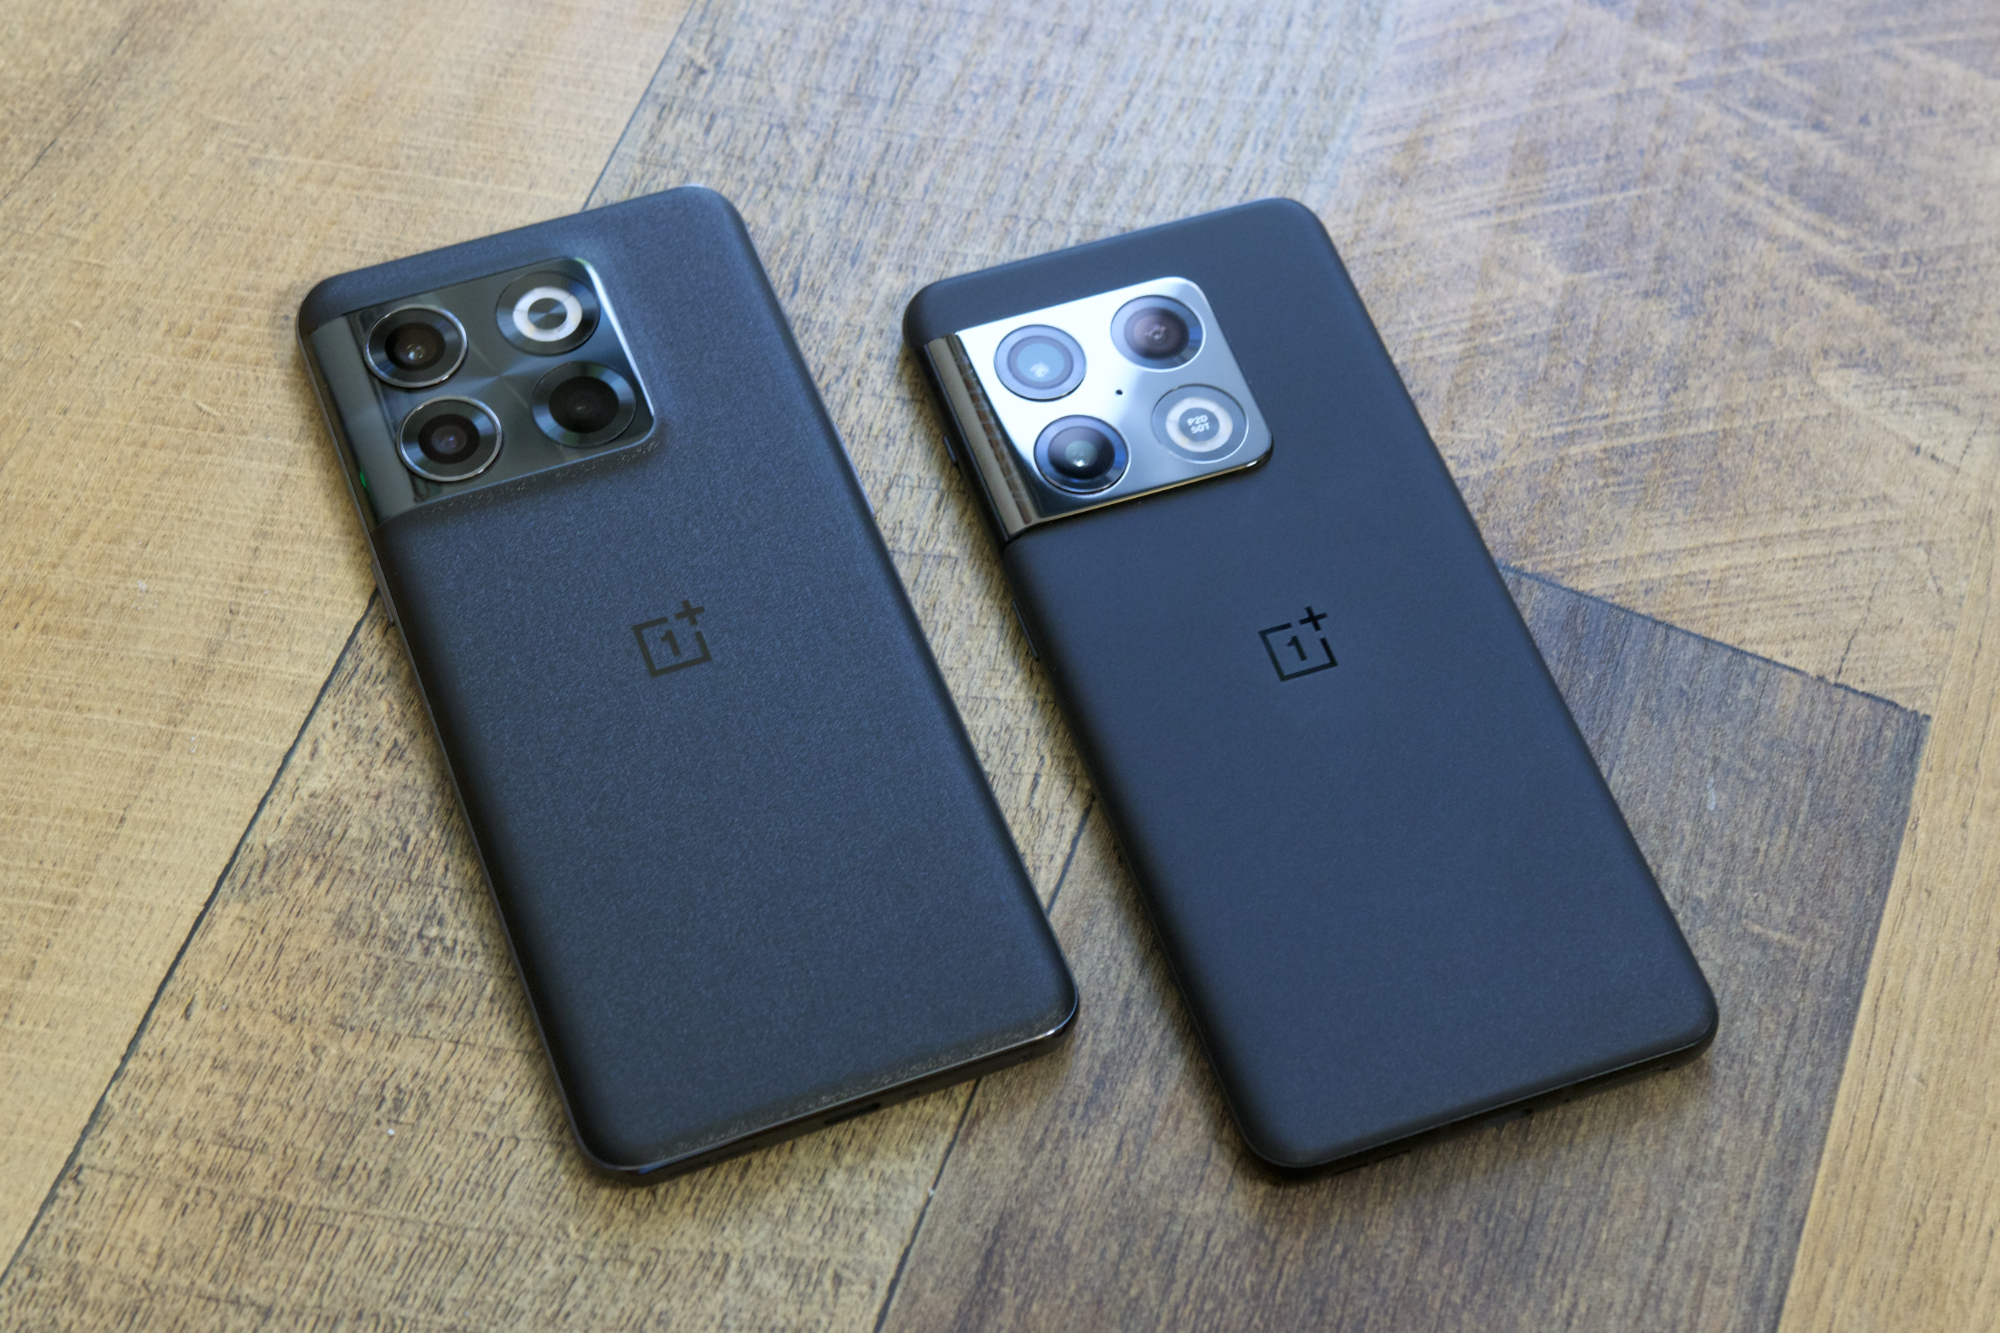 OnePlus 10T vs. OnePlus 10 Pro: Don't buy the wrong phone